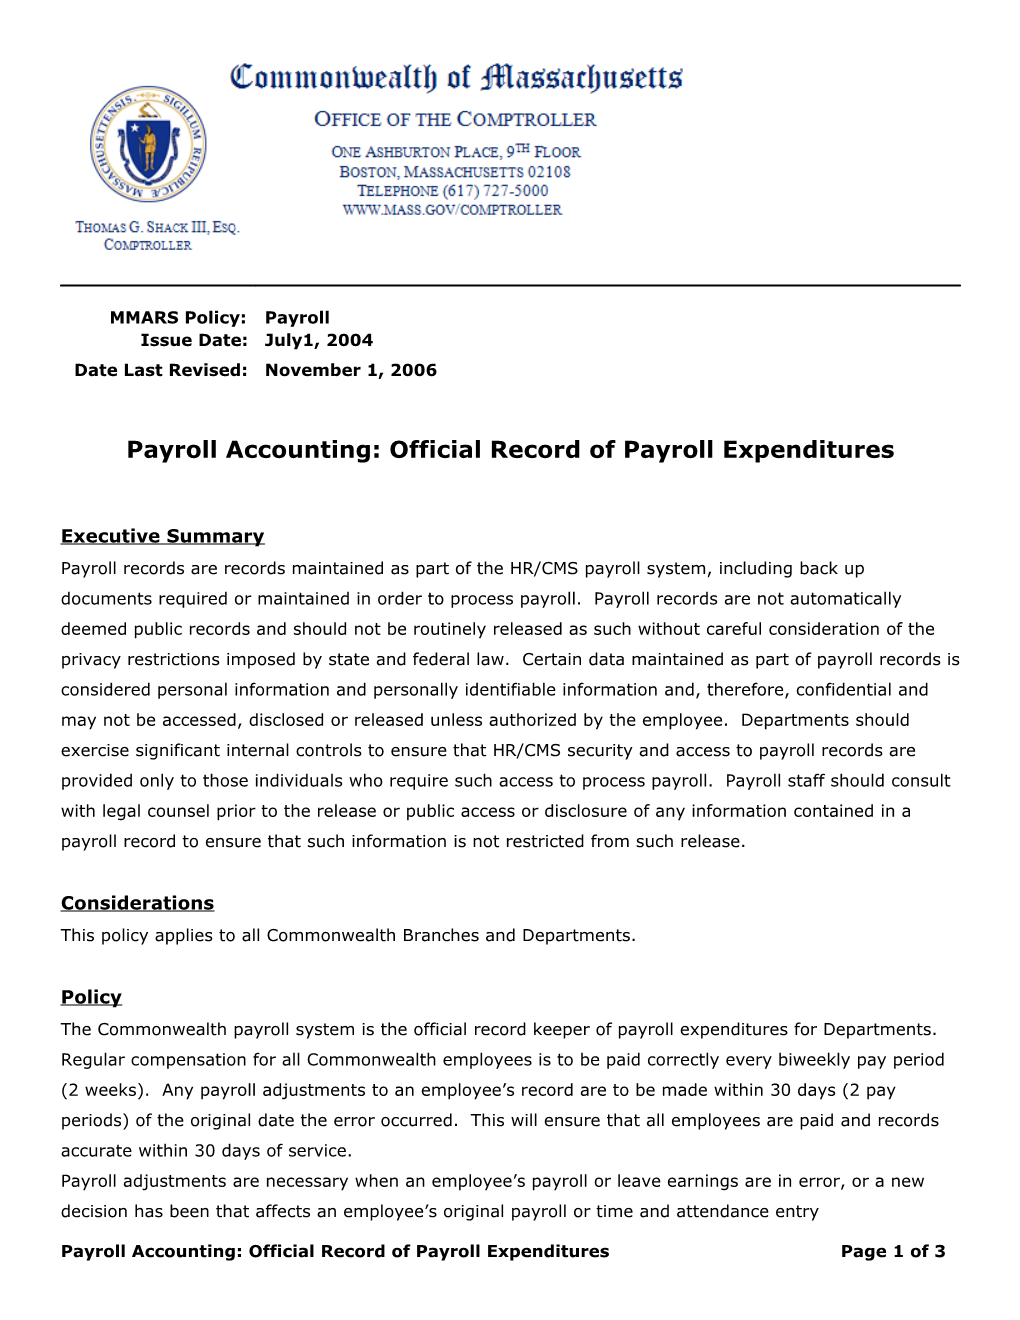 Payroll Accounting: Official Record of Payroll Expenditures